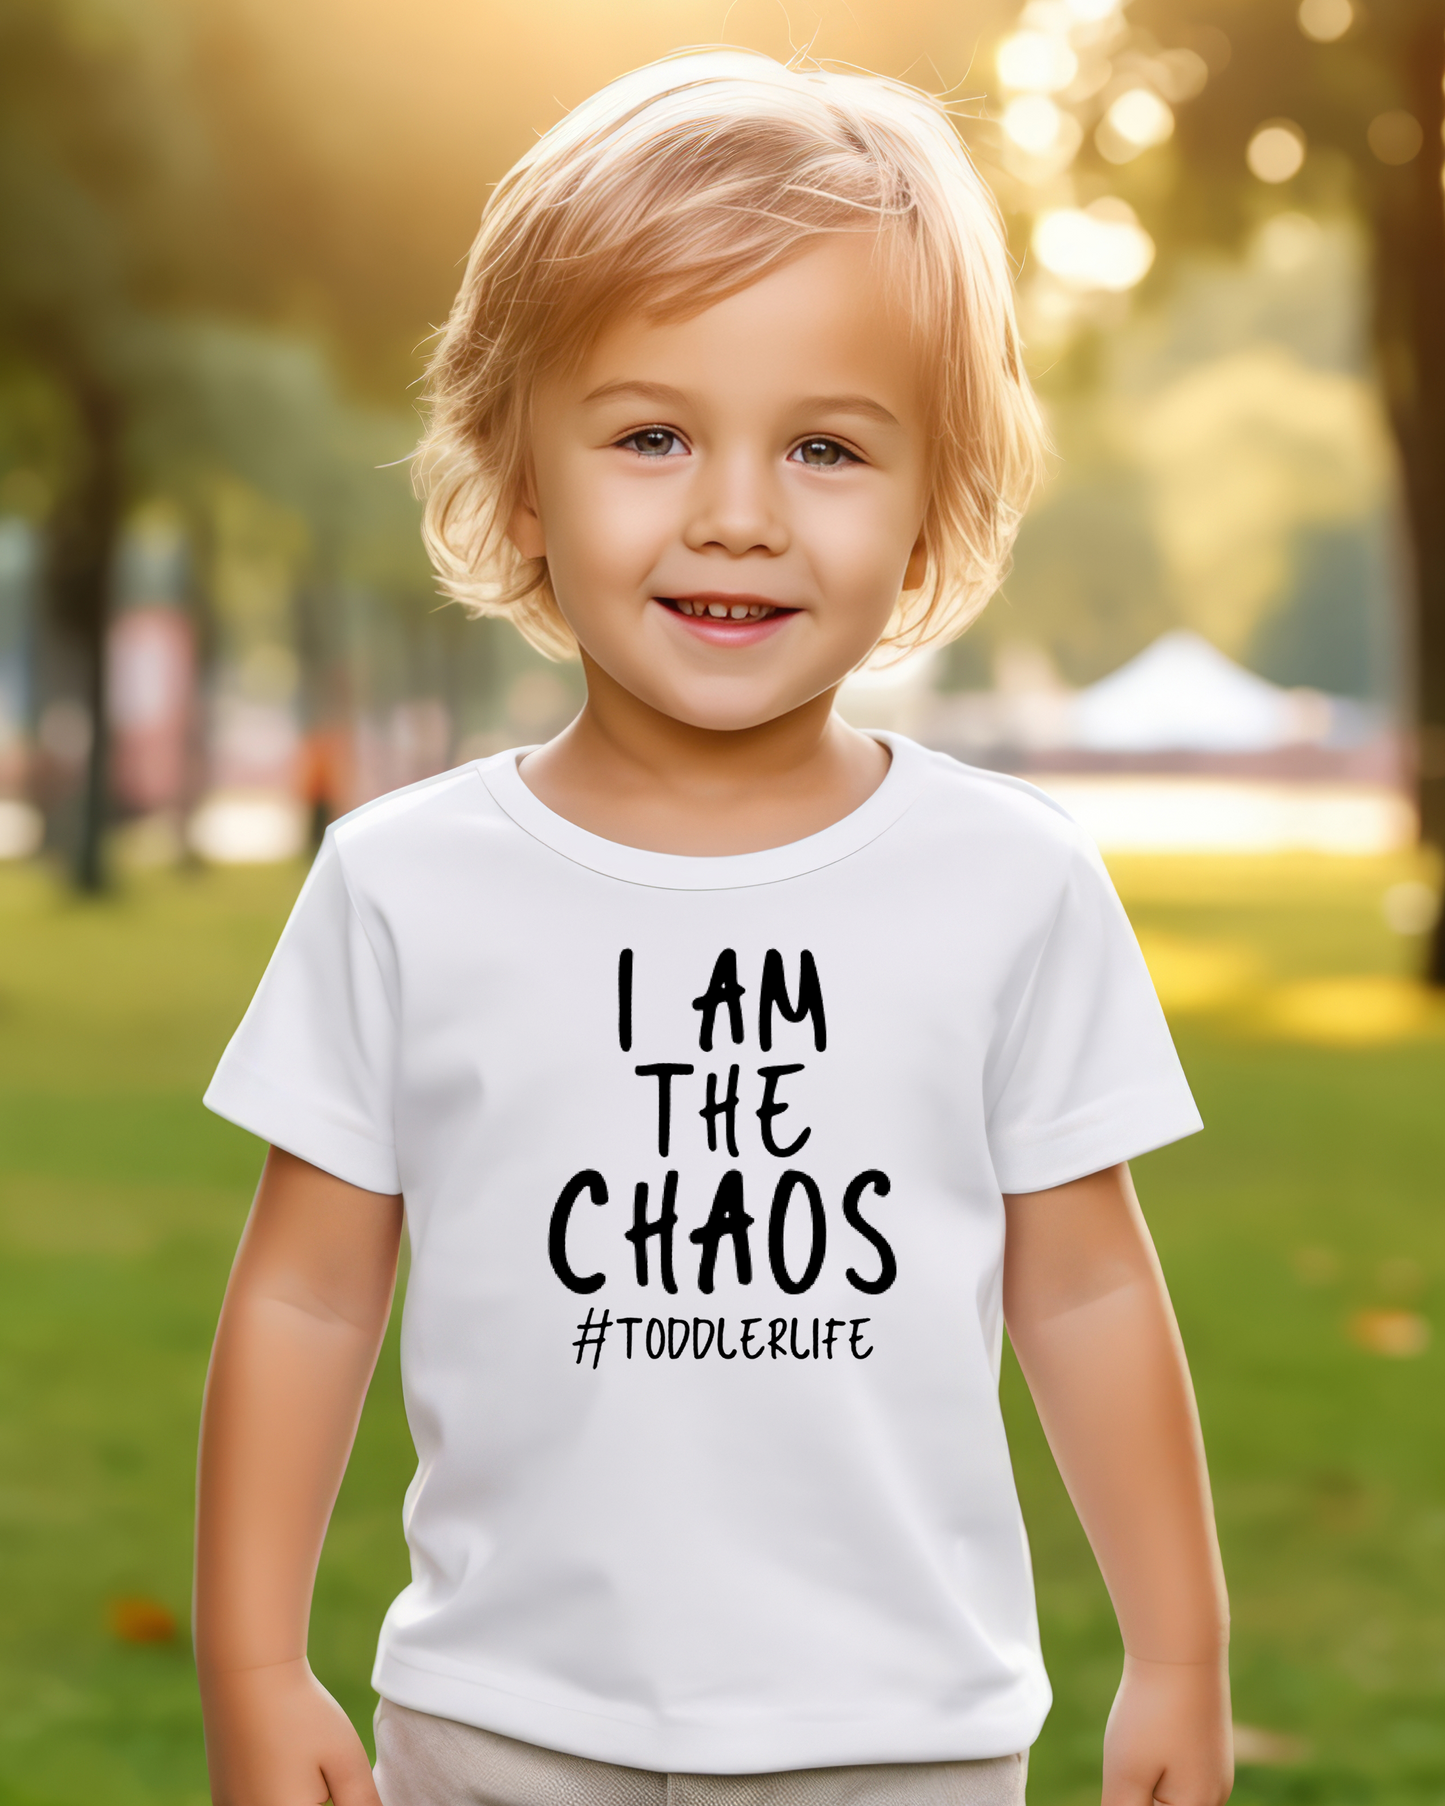 I Am The Chaos | Toddler Tshirt